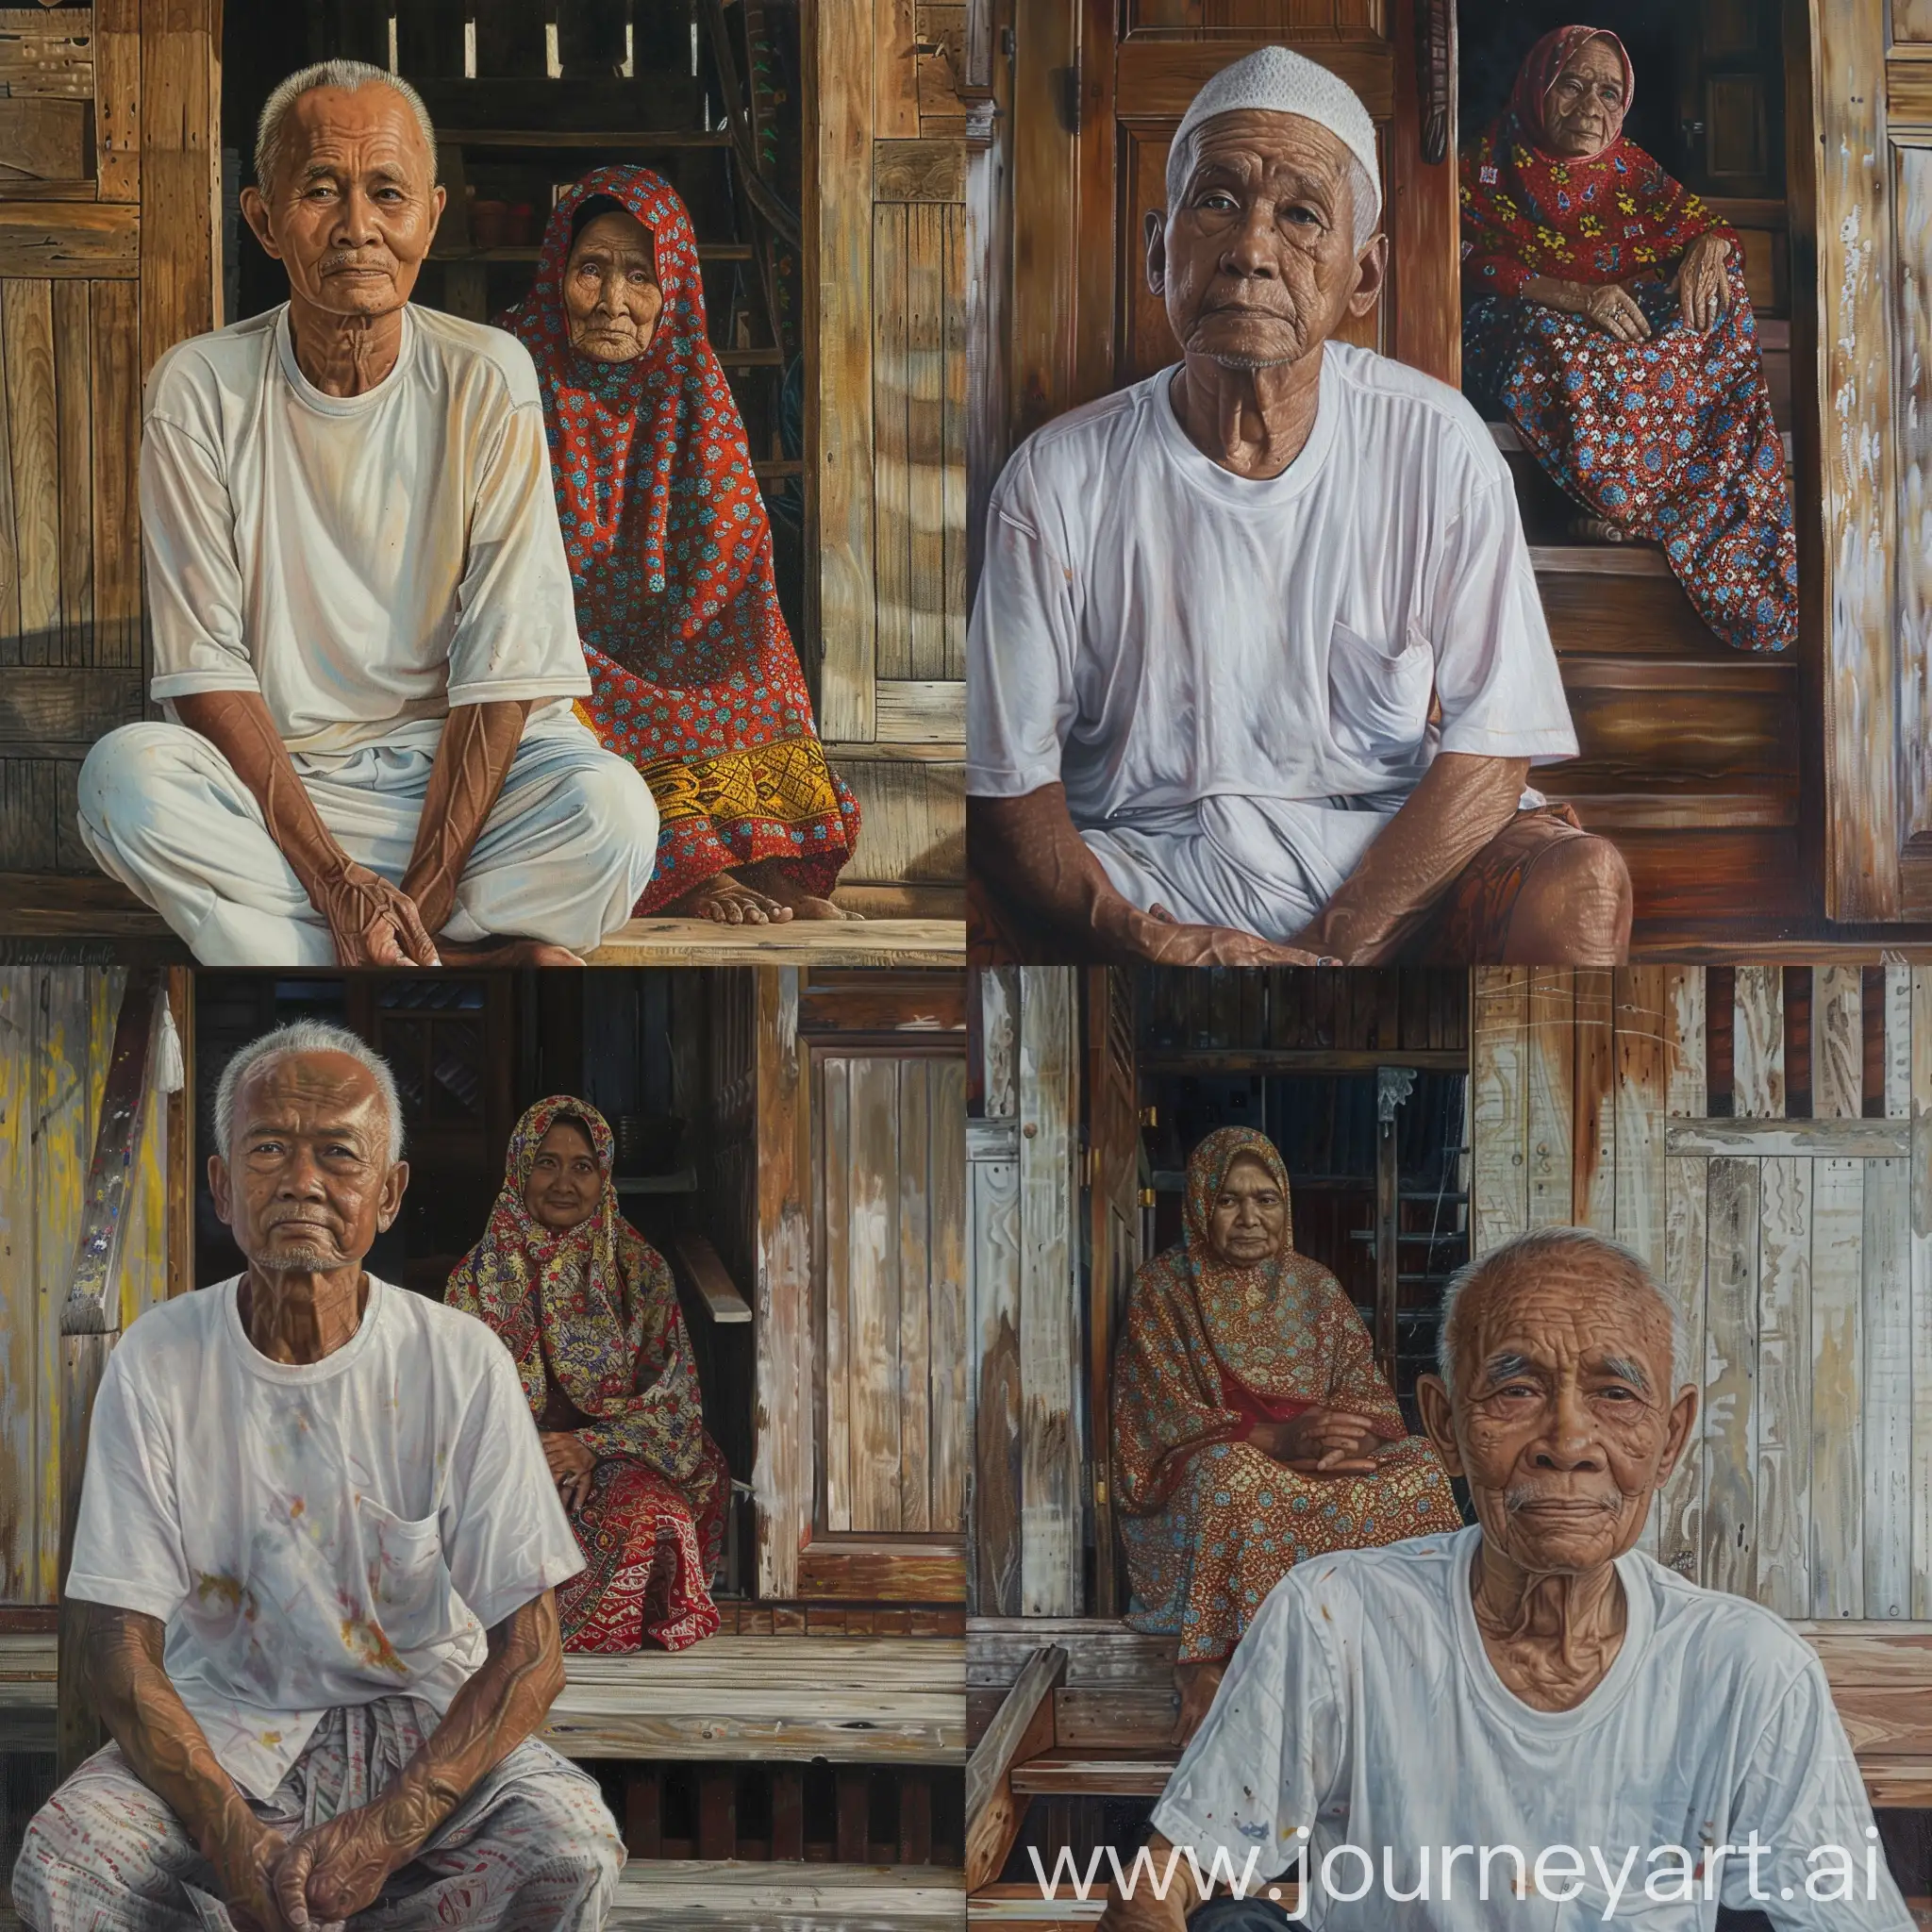 Elderly-Malay-Couple-Embracing-Traditions-in-Oil-Painting